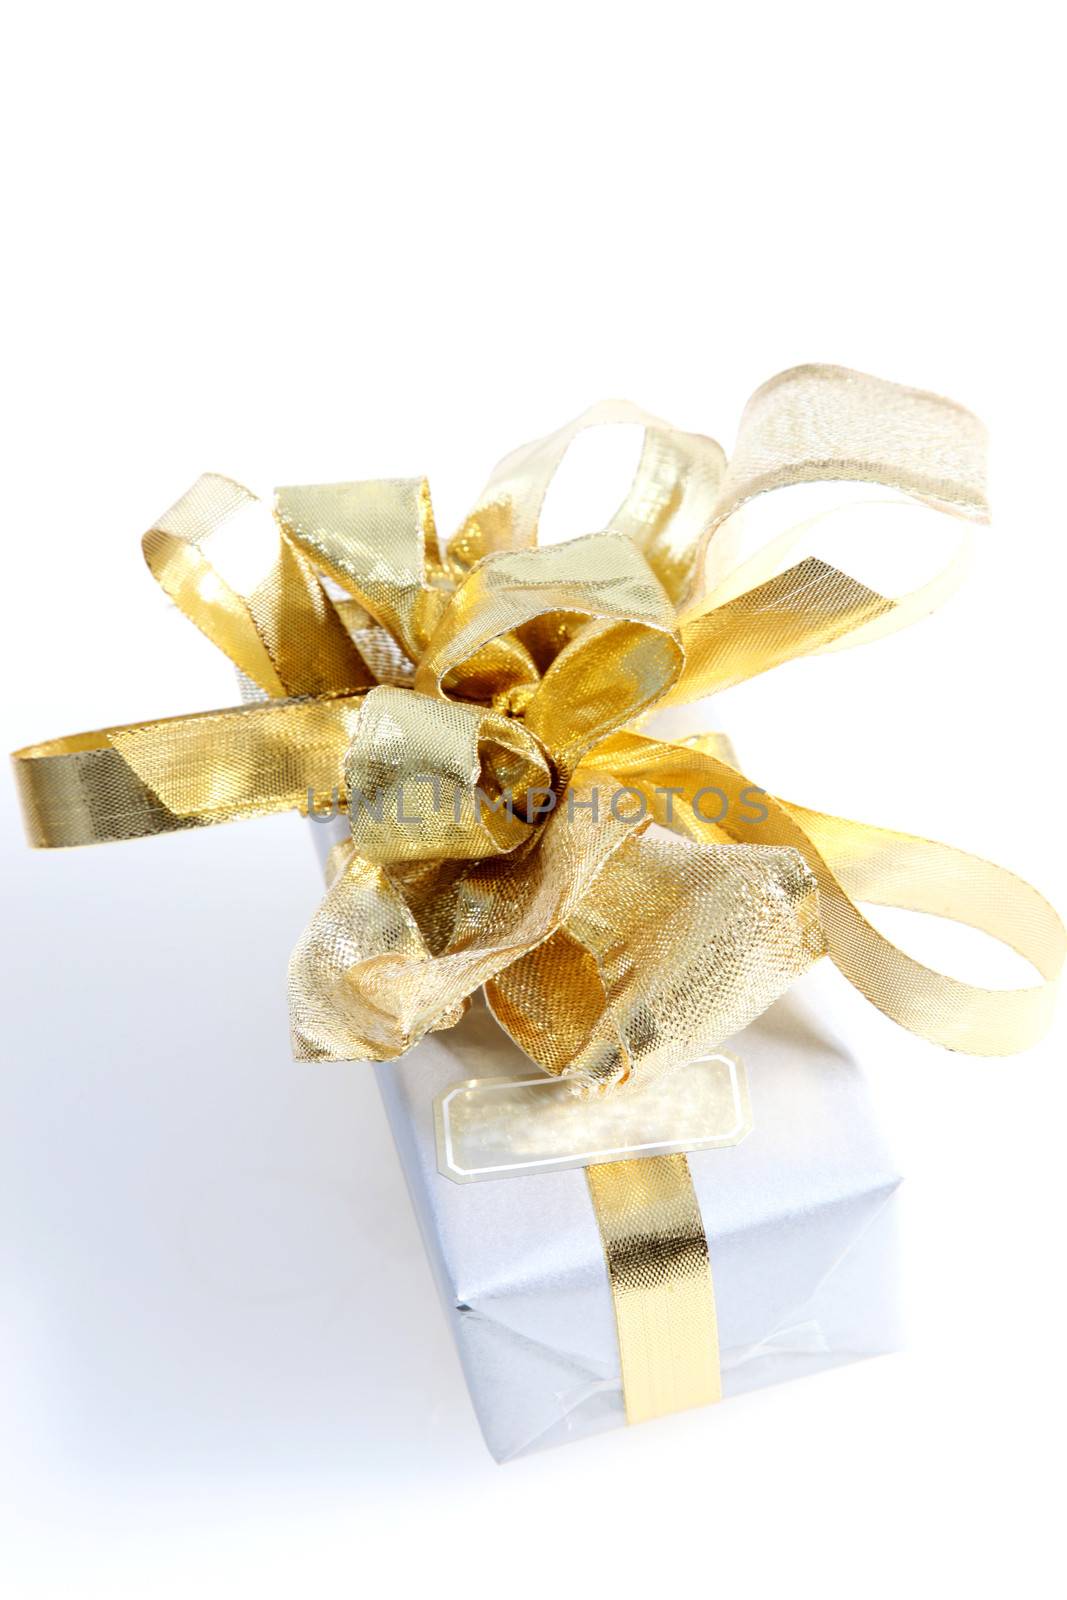 Gift with ornate gold bow by Farina6000